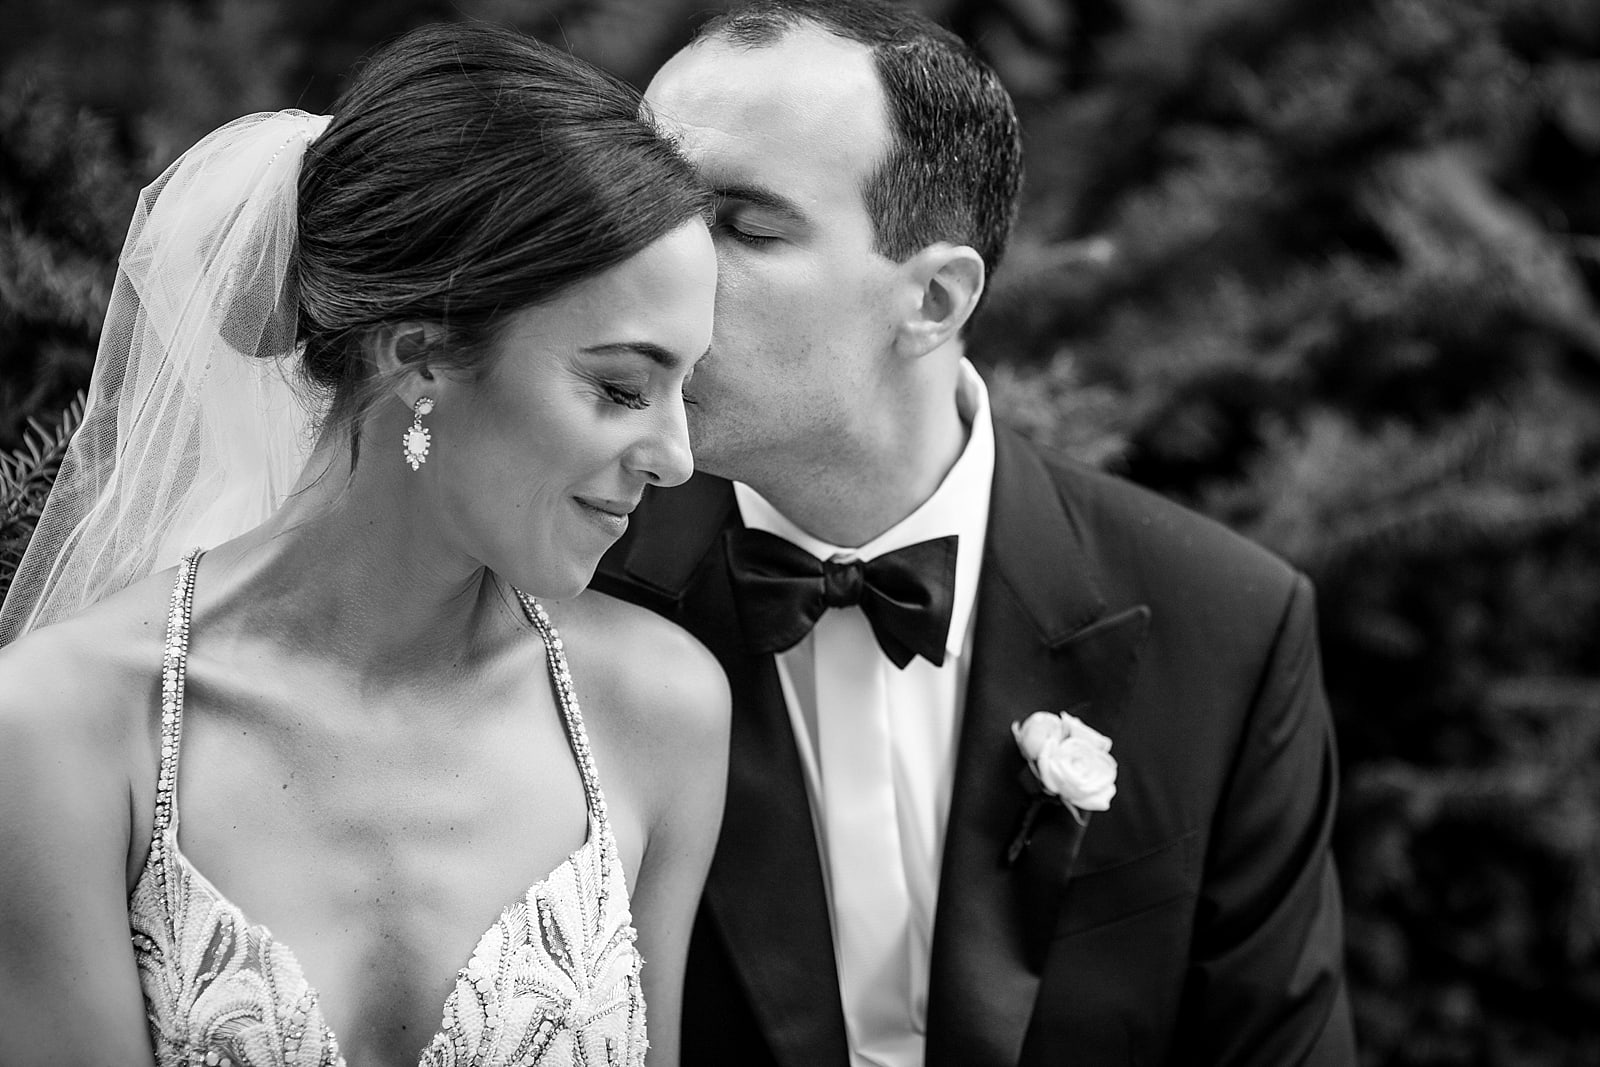 Bride and groom portrait, groom kissing bride on the cheek, black and white wedding portrait